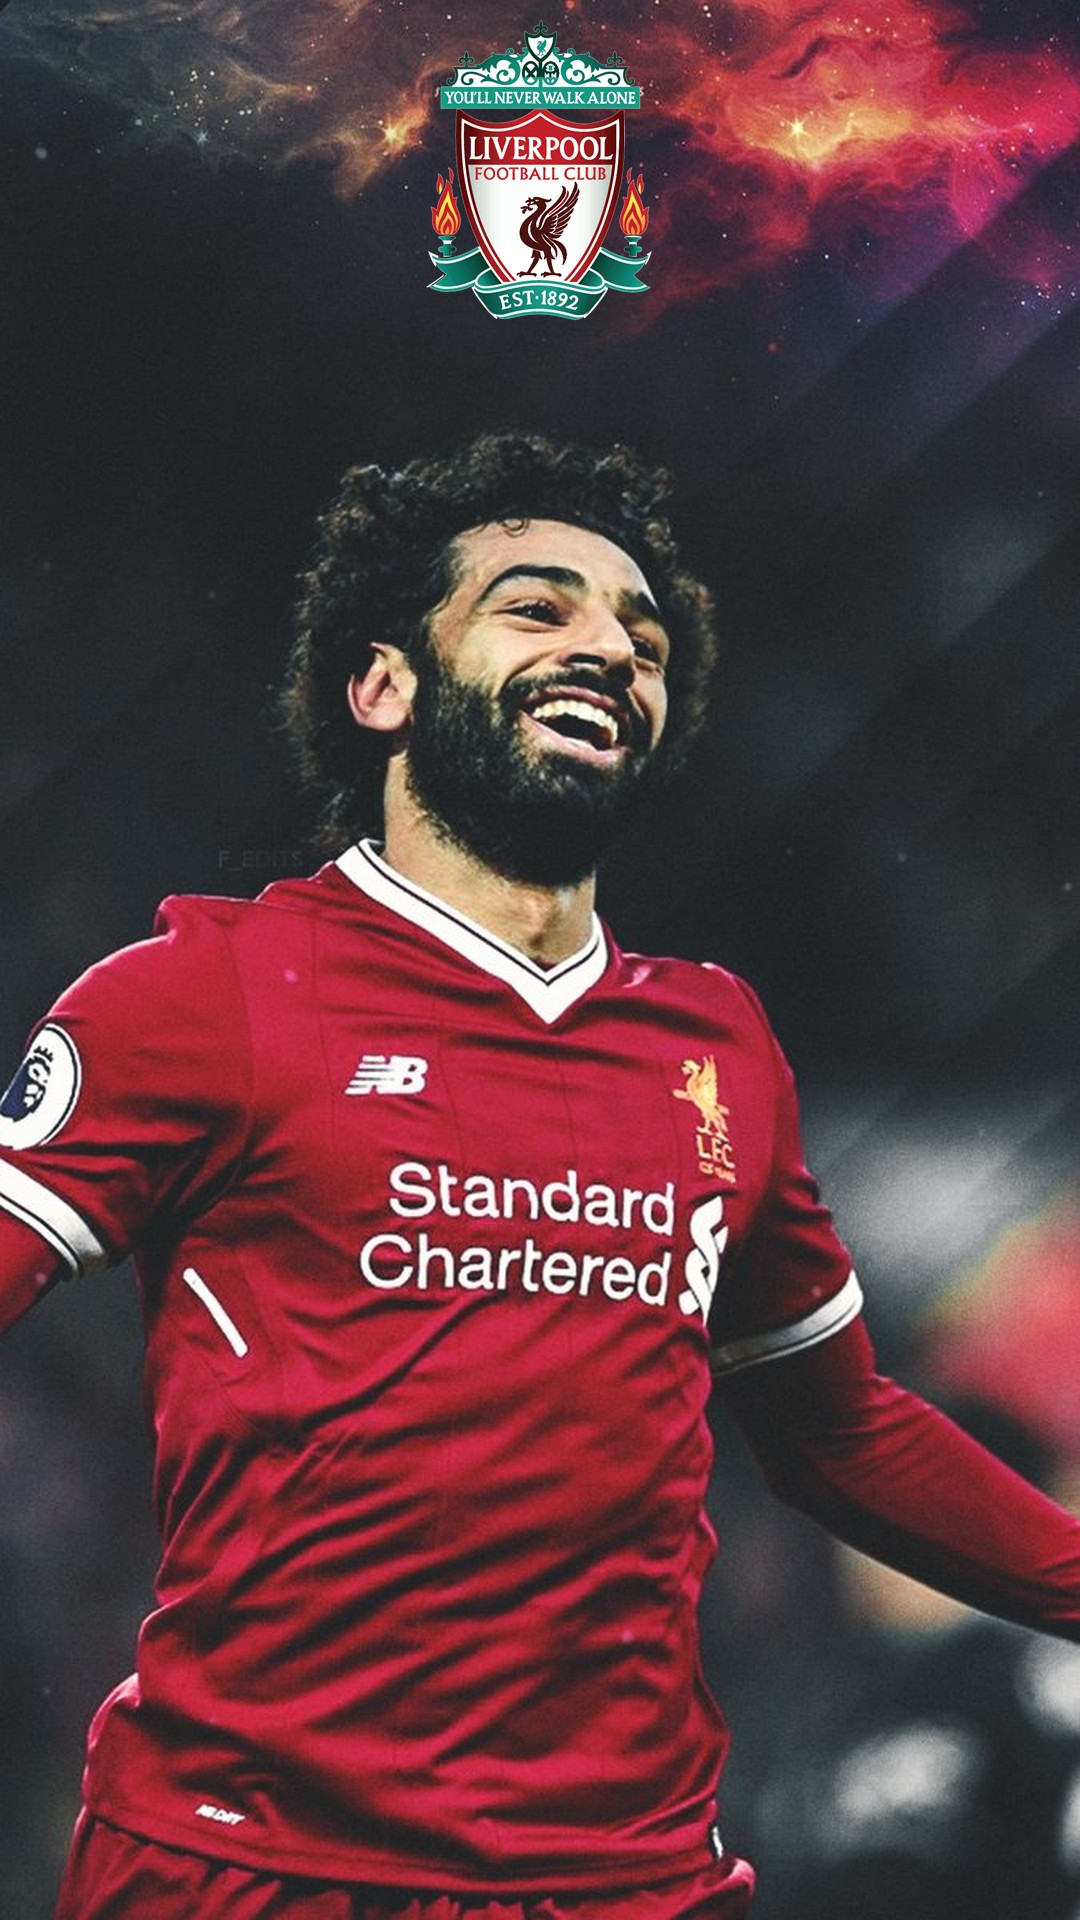 Mobile Wallpapers Mohamed Salah with image resolution 1080x1920 pixel. You can make this wallpaper for your iPhone 5, 6, 7, 8, X backgrounds, Mobile Screensaver, or iPad Lock Screen